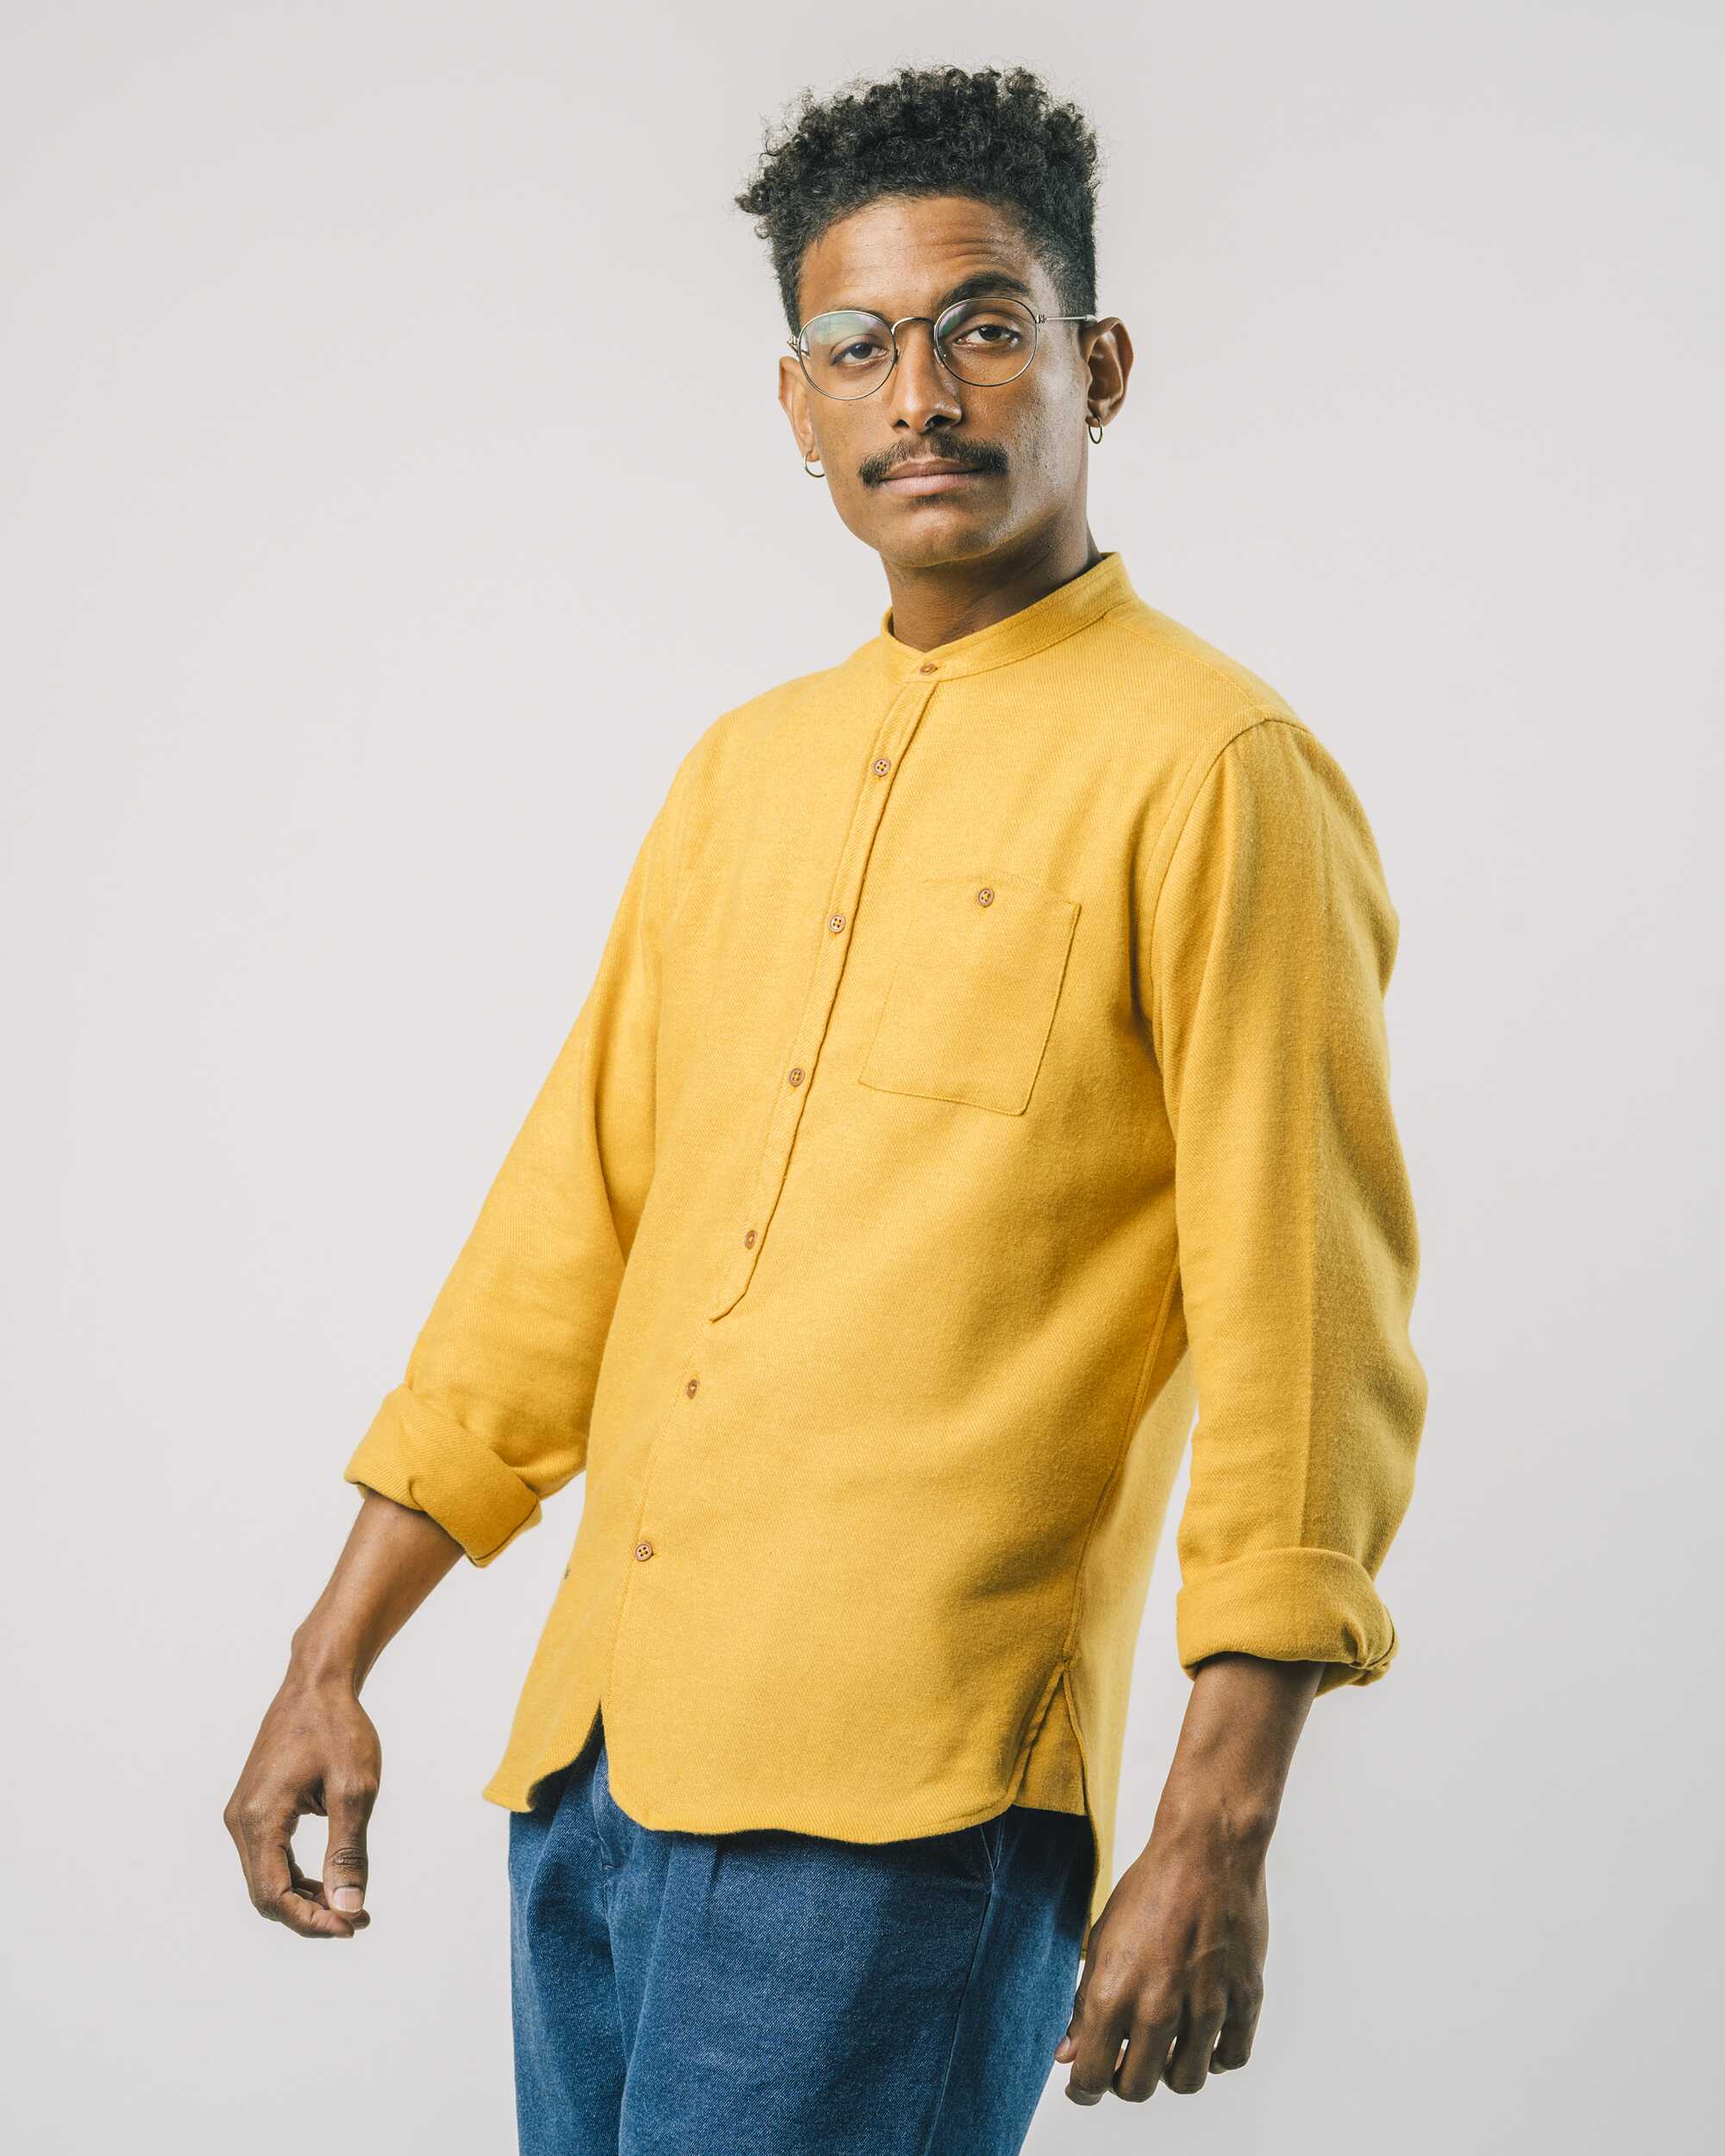 Flannel shirt in mustard - yellow made from 100% organic cotton from Brava Fabrics